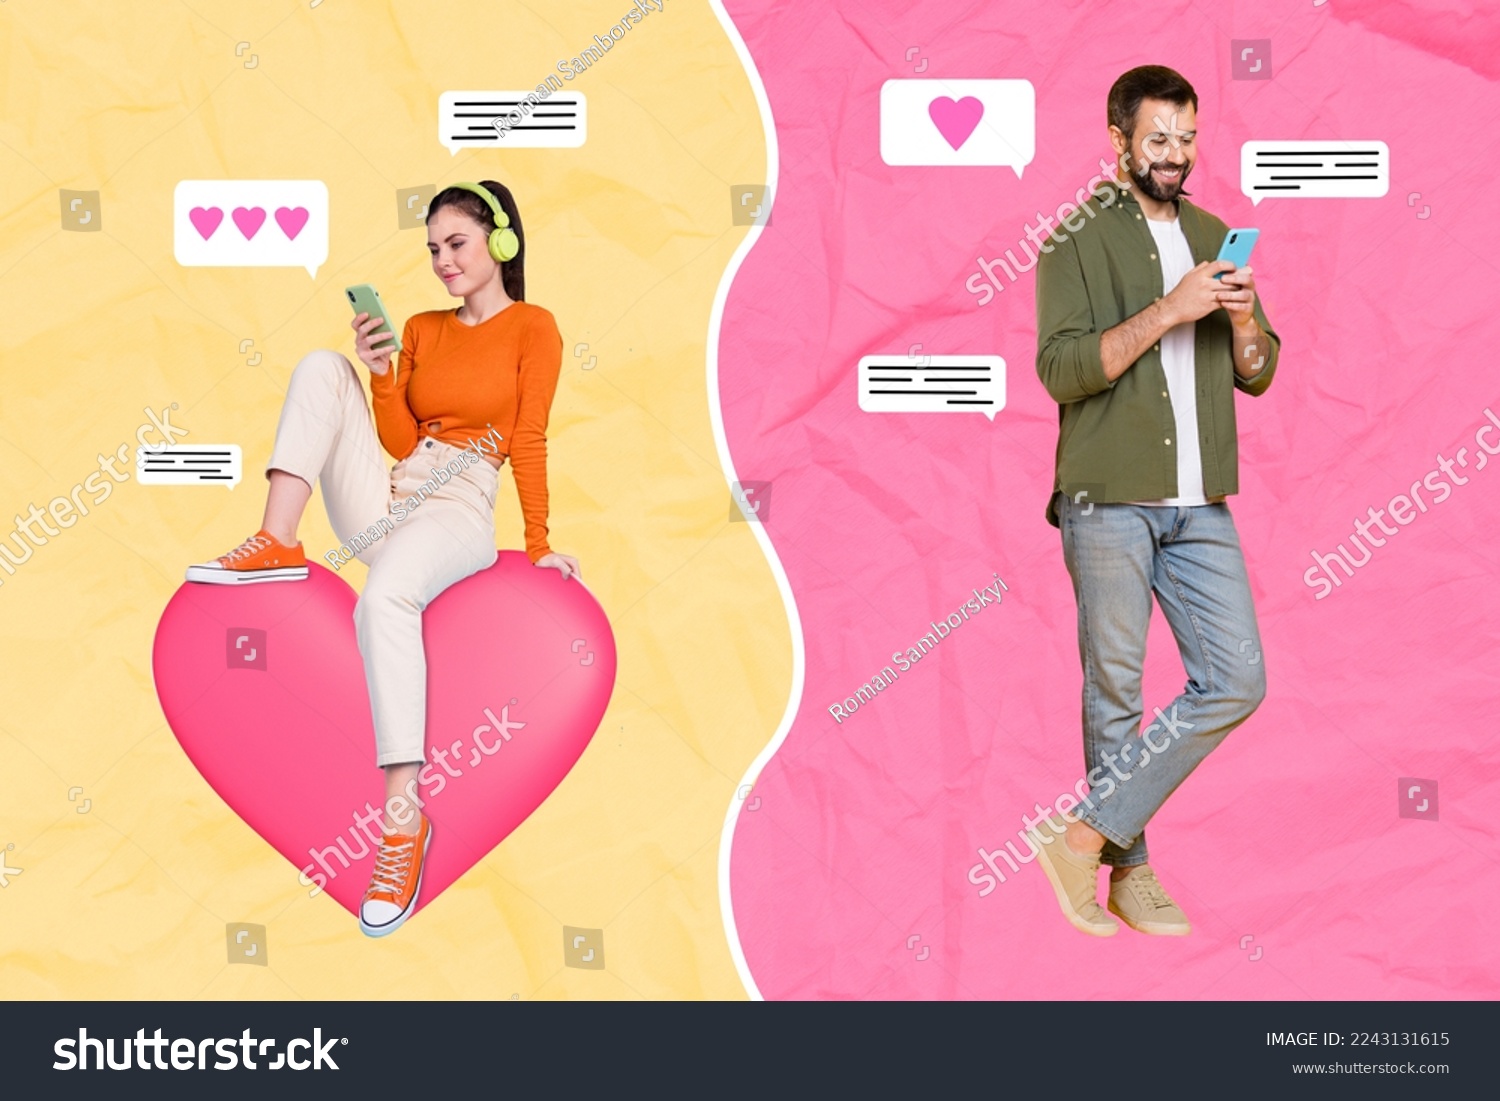 Artwork magazine collage picture of charming lady guy communicating modern devices isolated drawing background #2243131615